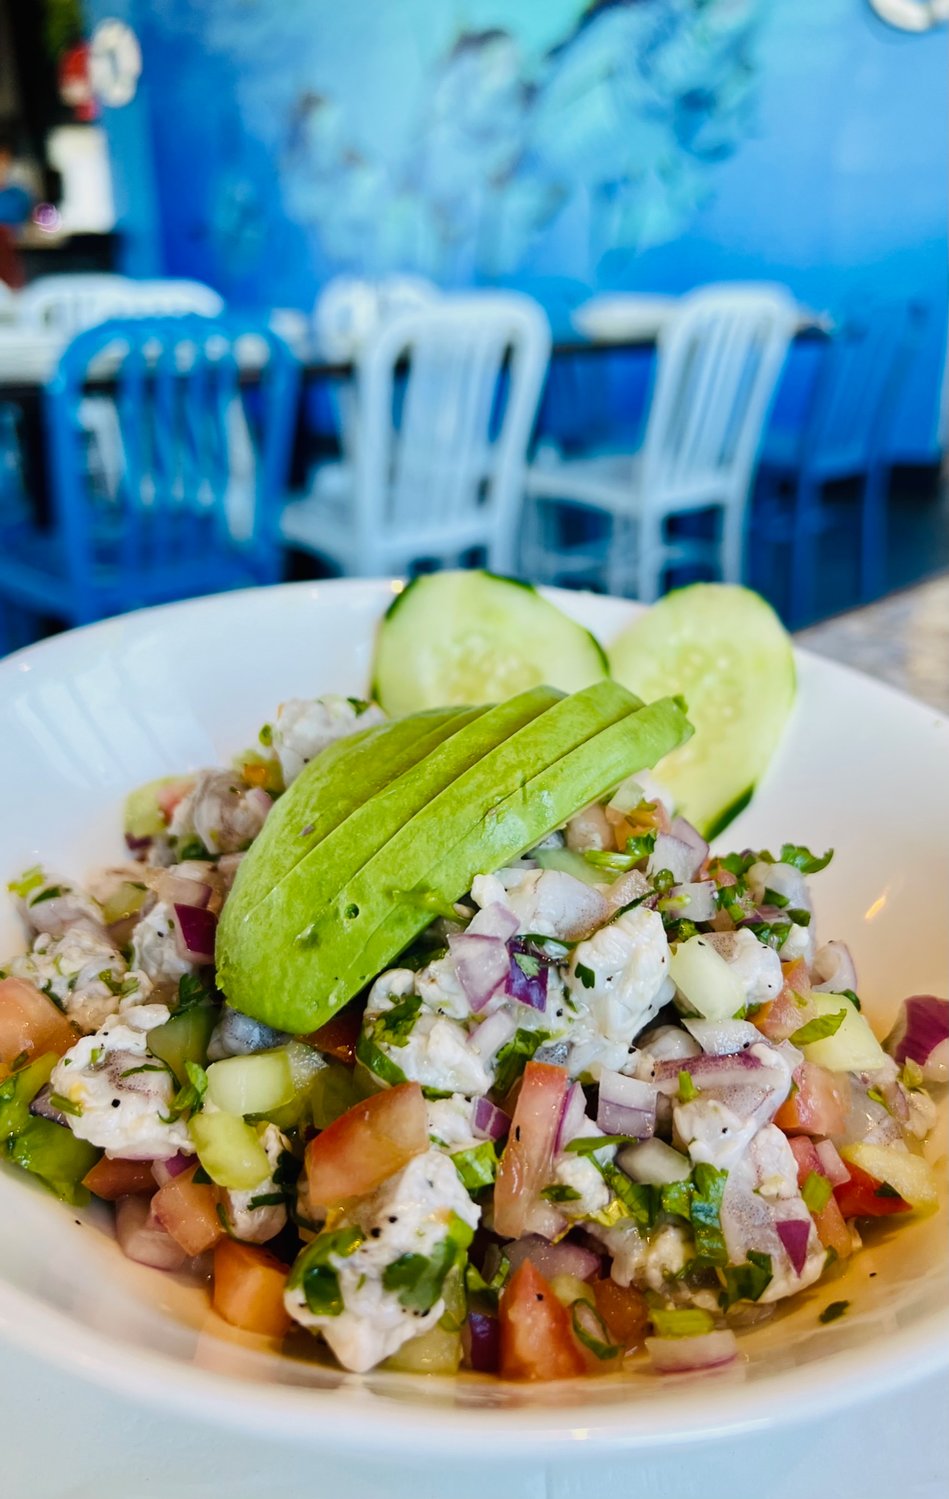 La Perla features several types of ceviche, including shrimp, which is large enough to share.